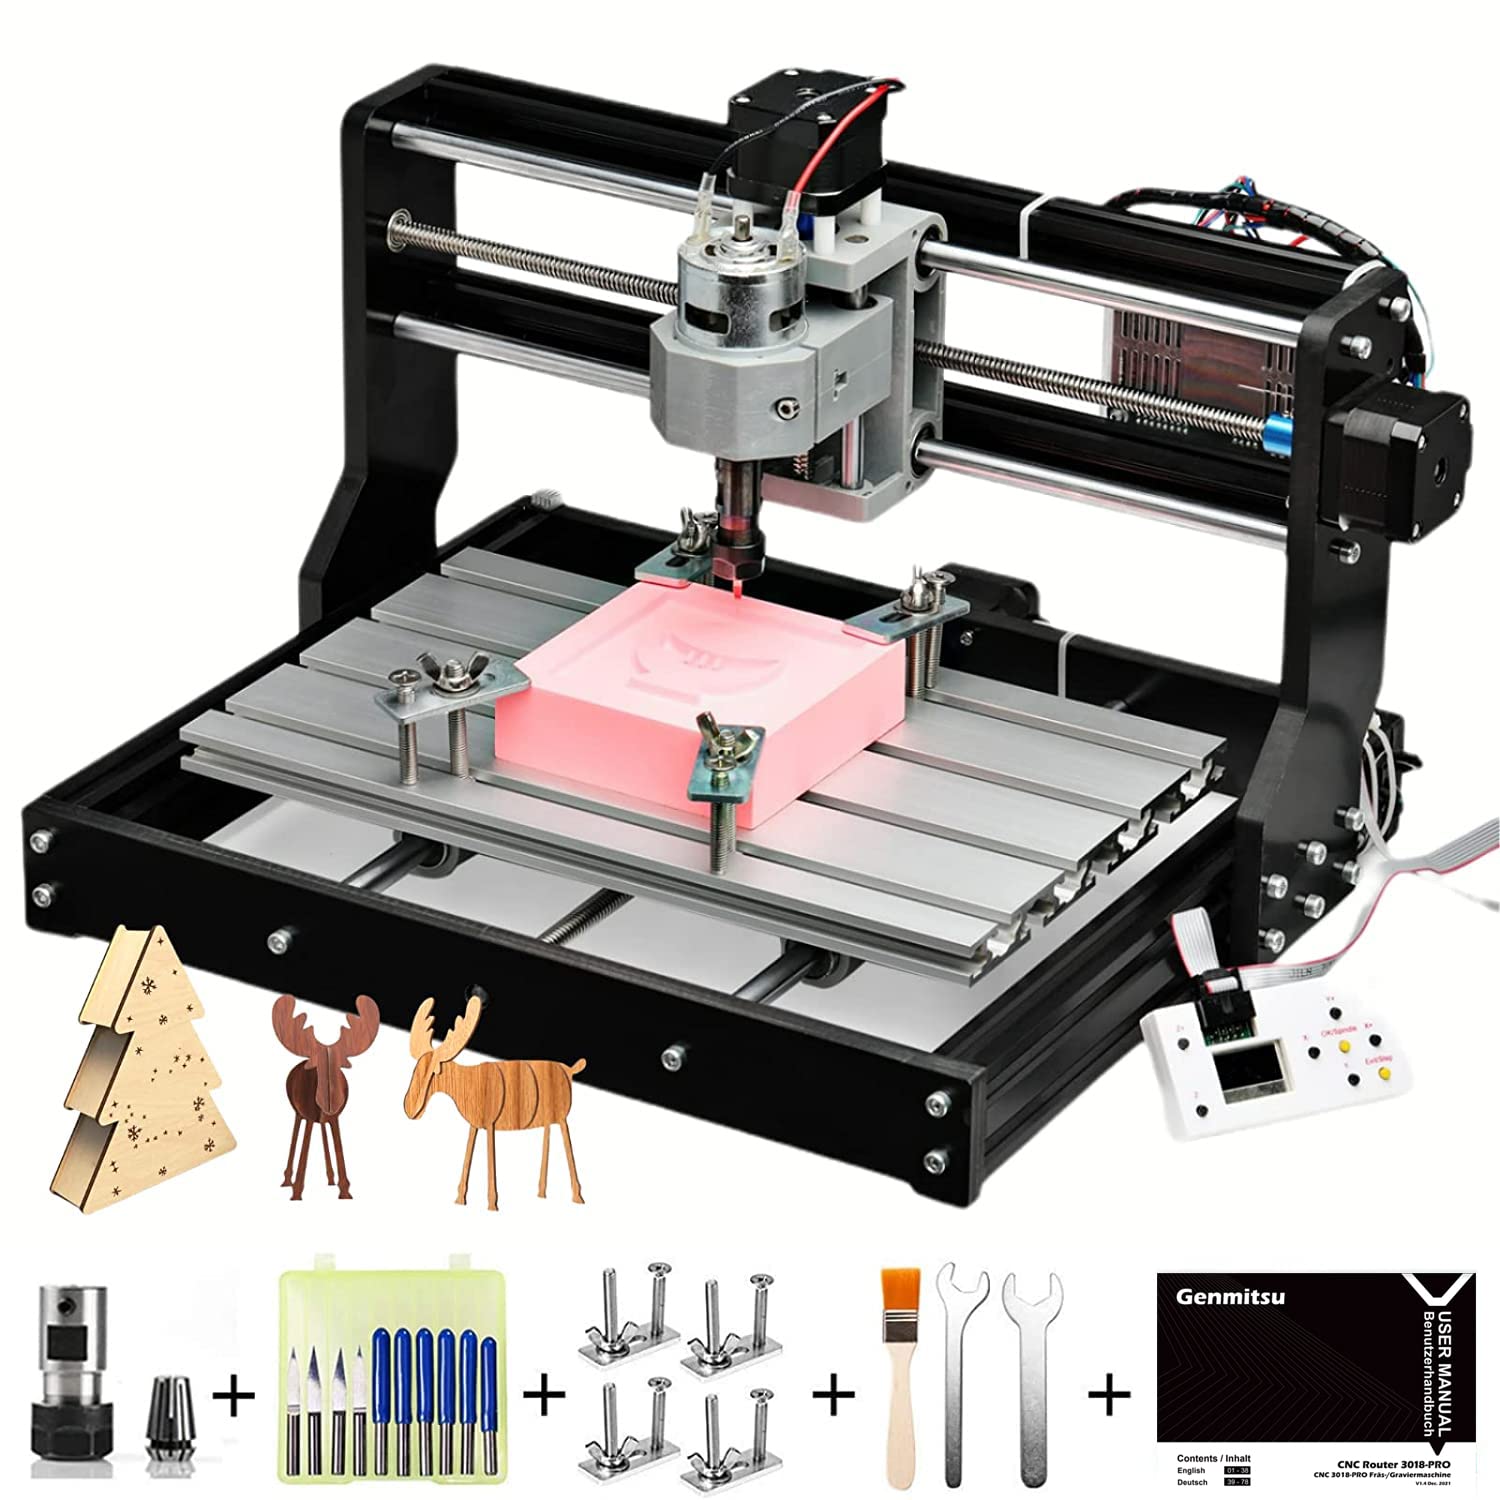 Genmitsu CNC 3018-PRO Router Kit GRBL Control 3 Axis Plastic Acrylic PCB PVC Wood Carving Milling Engraving Machine, XYZ Working Area 300x180x45mm